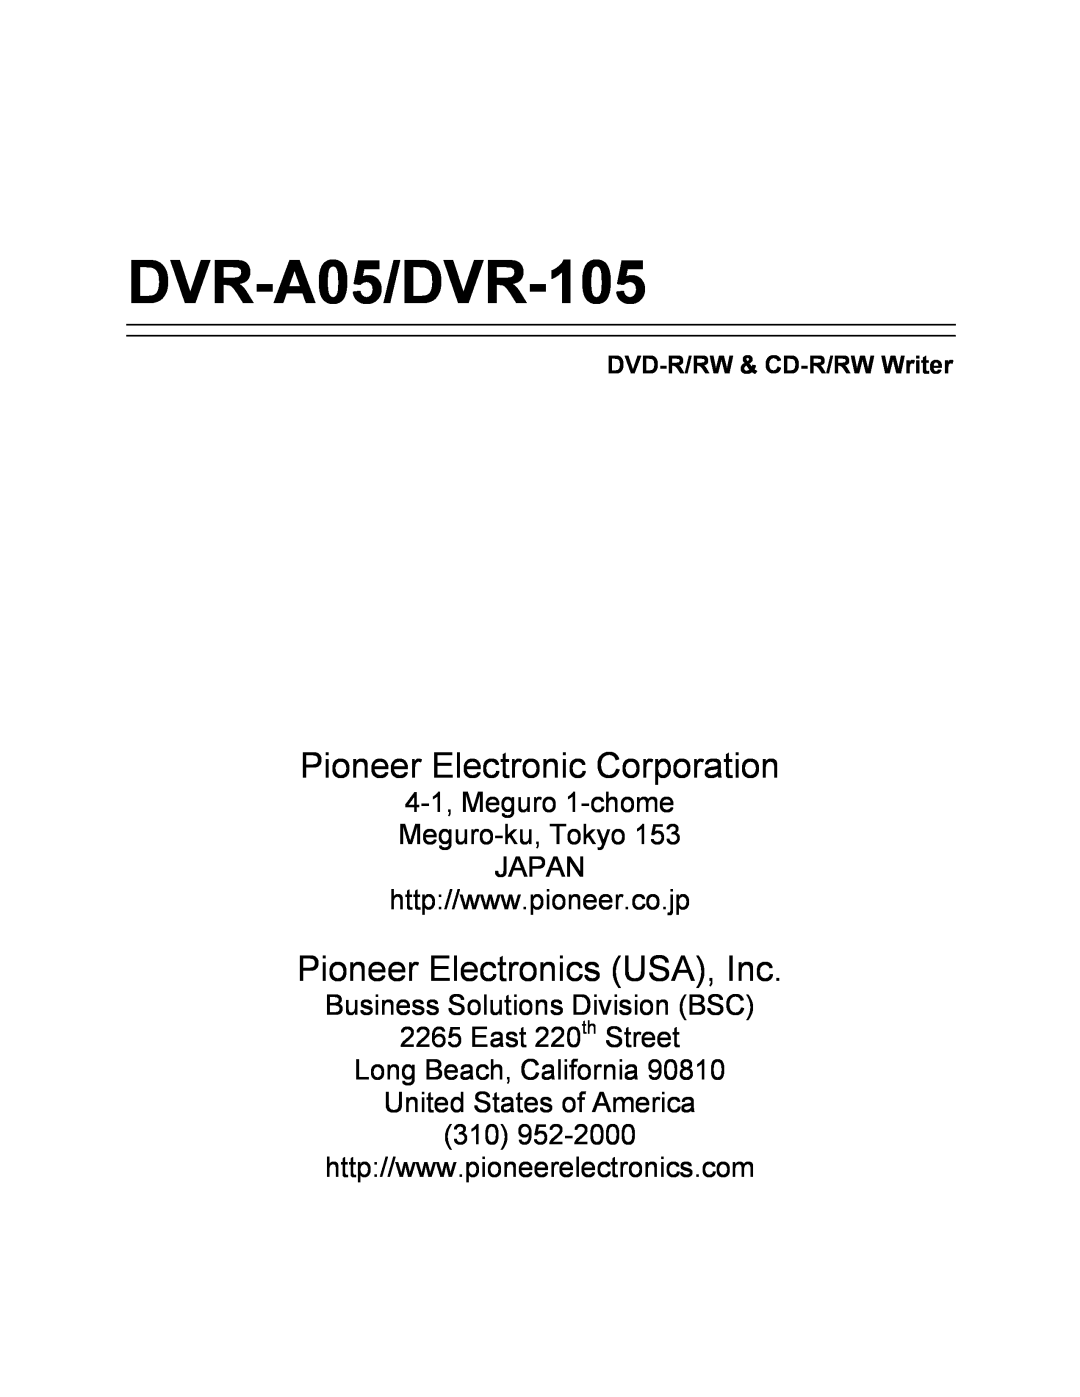 Pioneer DVR-105 4-1, Meguro 1-chome Meguro-ku, Tokyo JAPAN, Business Solutions Division BSC 2265 East 220th Street 